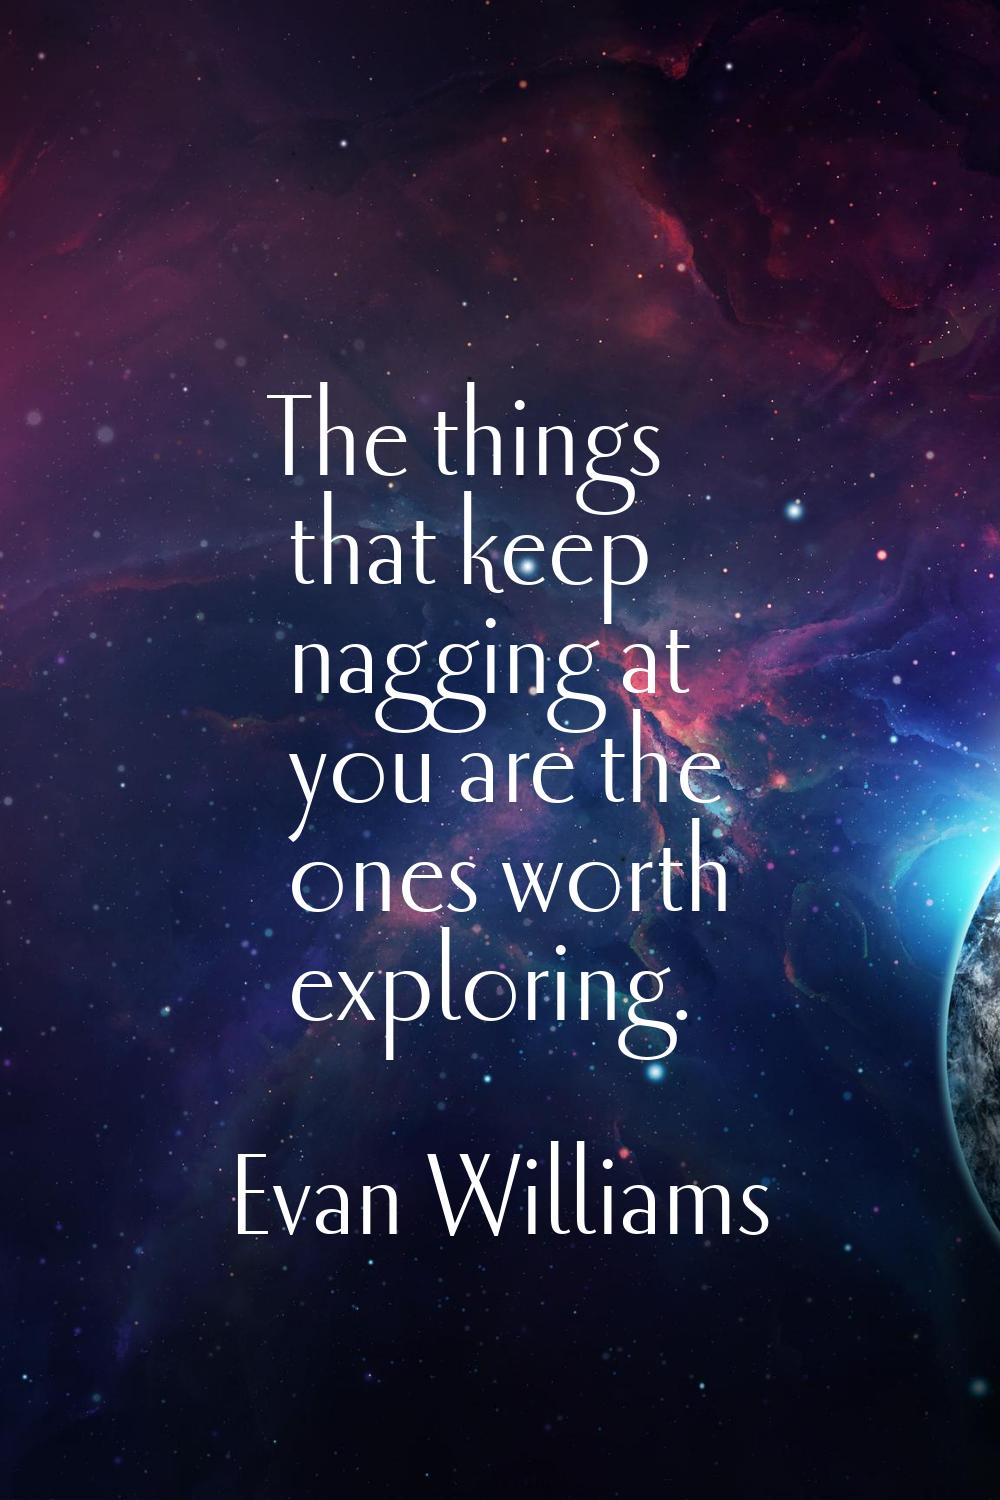 The things that keep nagging at you are the ones worth exploring.